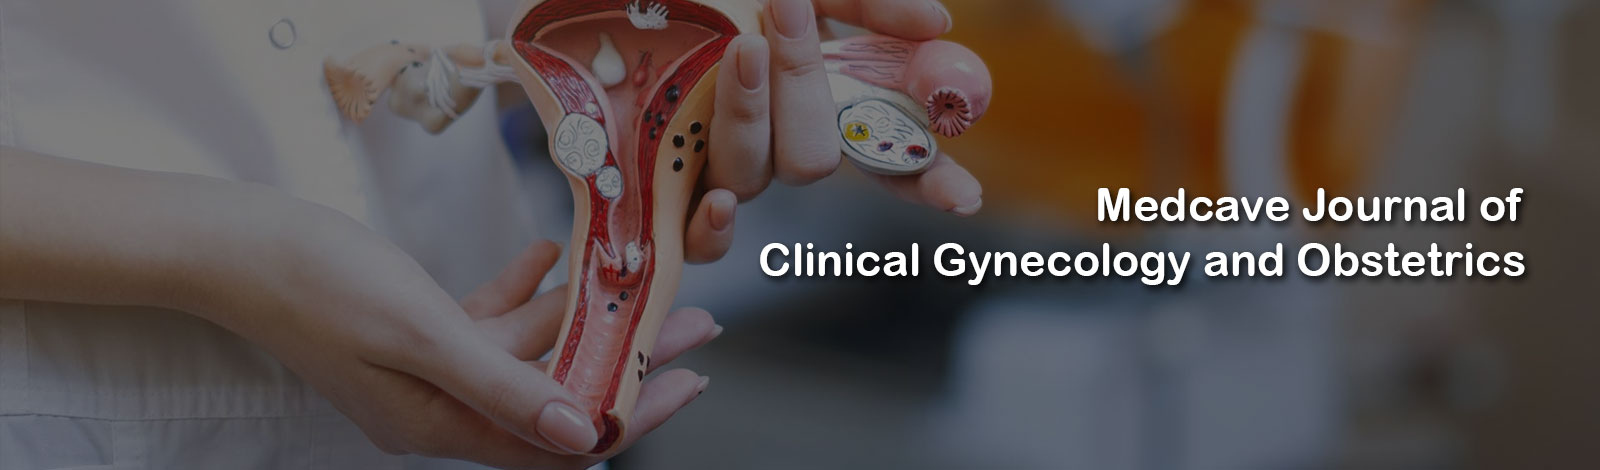 Medcave Journal of Clinical Gynecology and Obstetrics